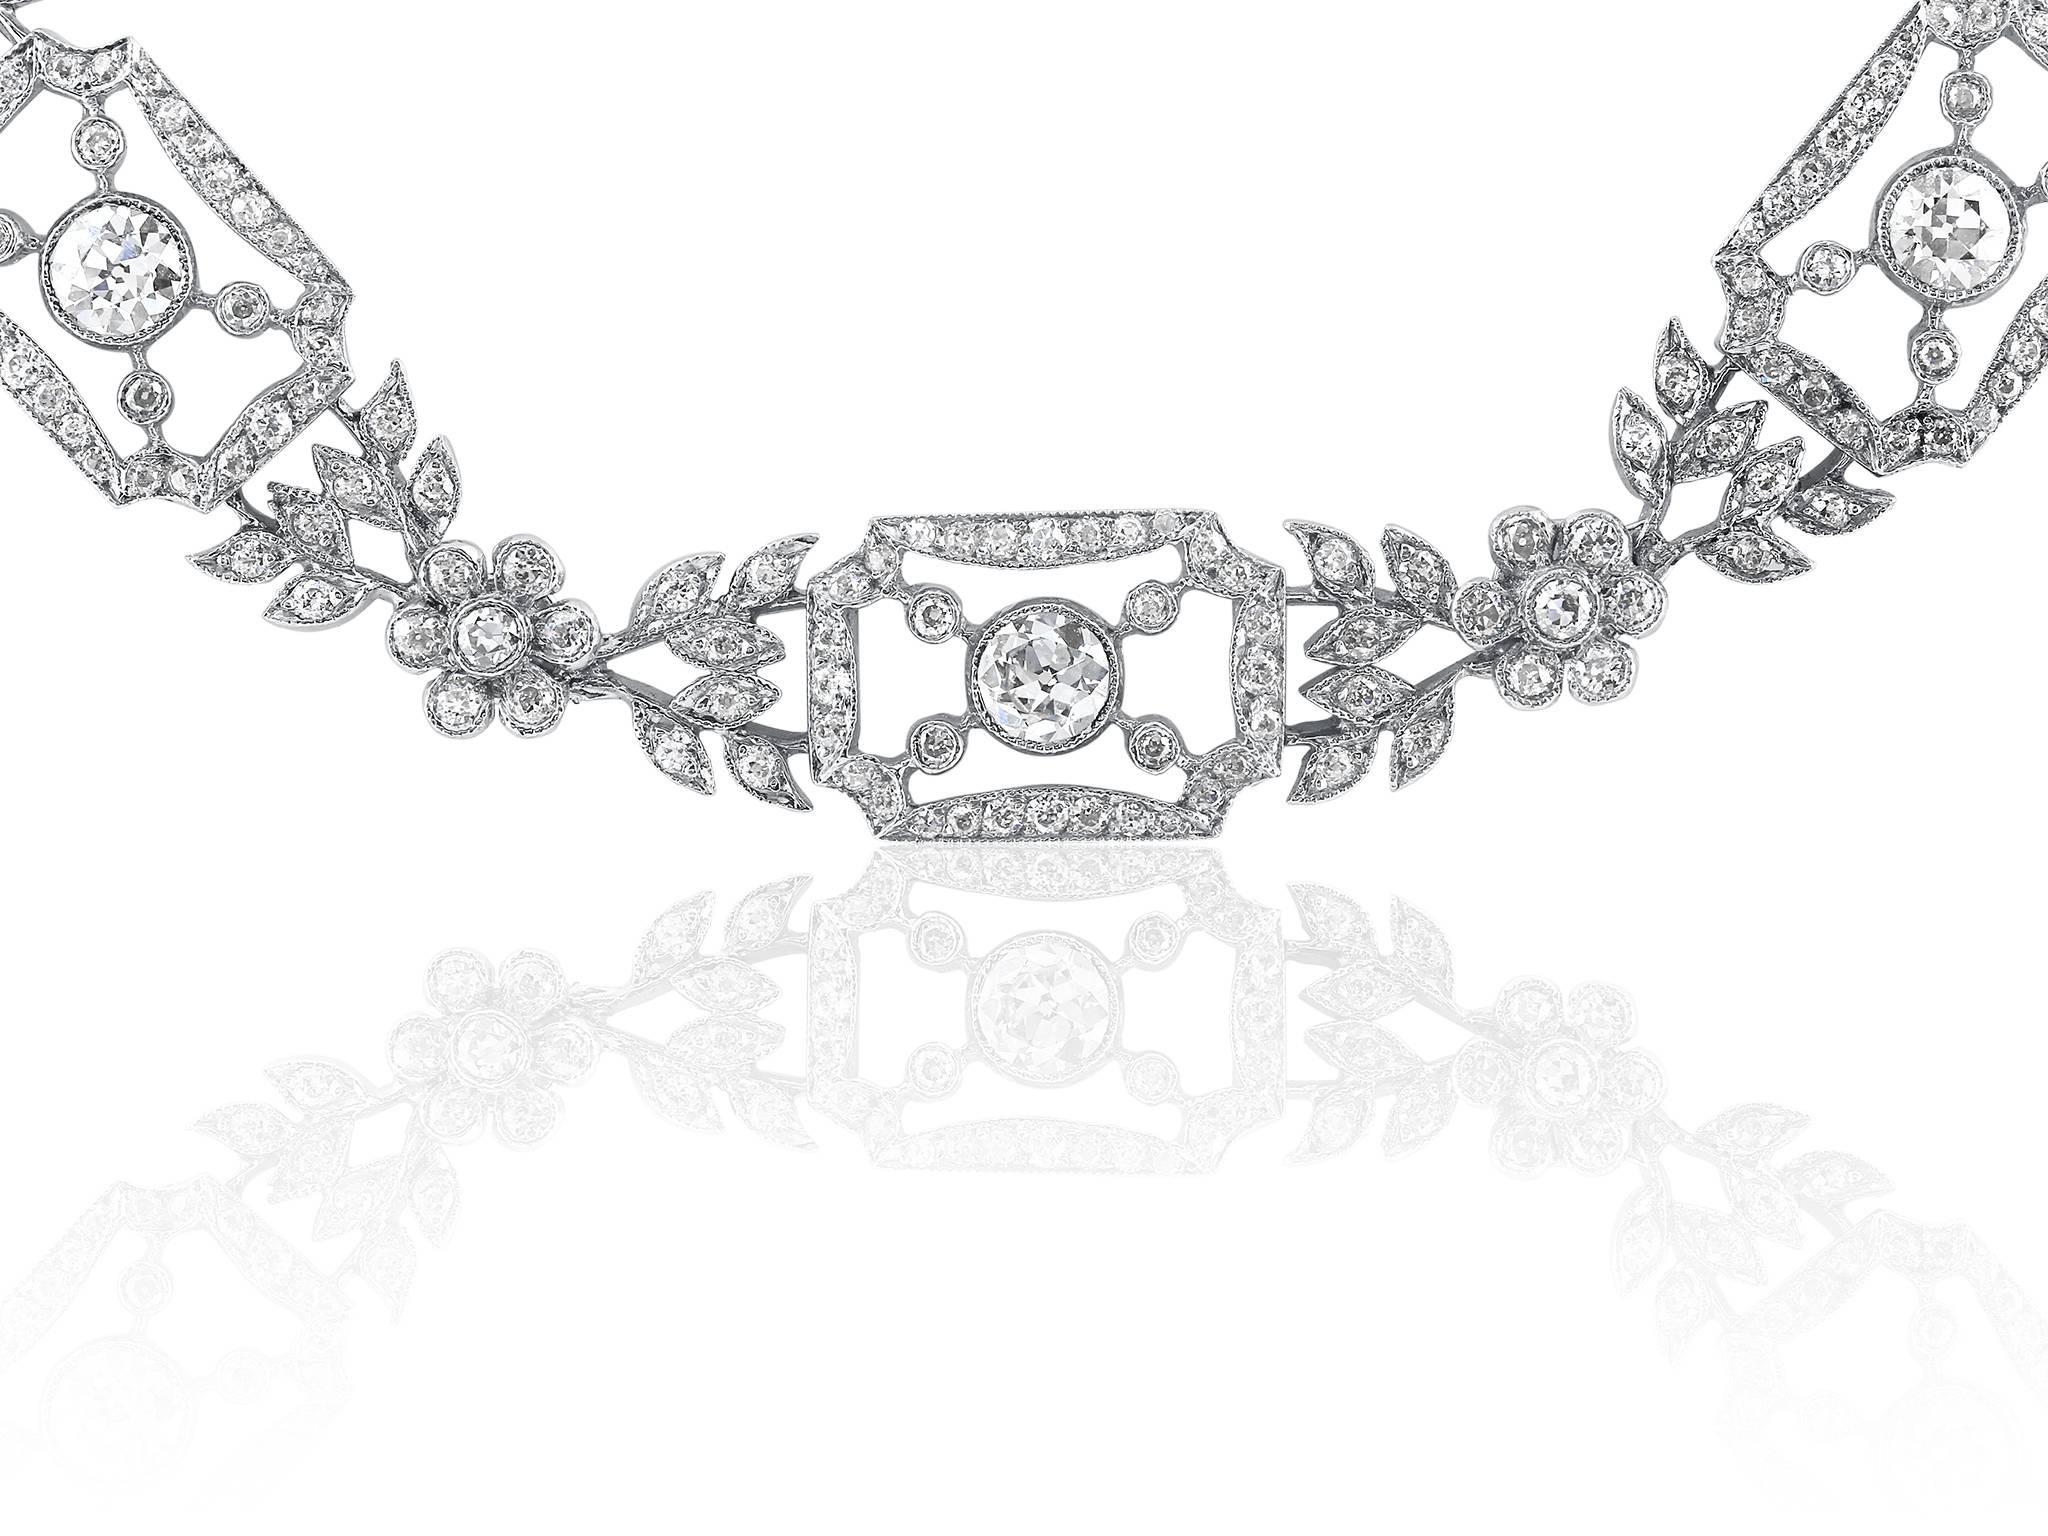 Platinum and diamond open work vintage style necklace consisting of approximately 20.50 carats total weight of round brilliant cut diamonds having a color and clarity of G/H VS. the necklace is 23 1/2 inches.